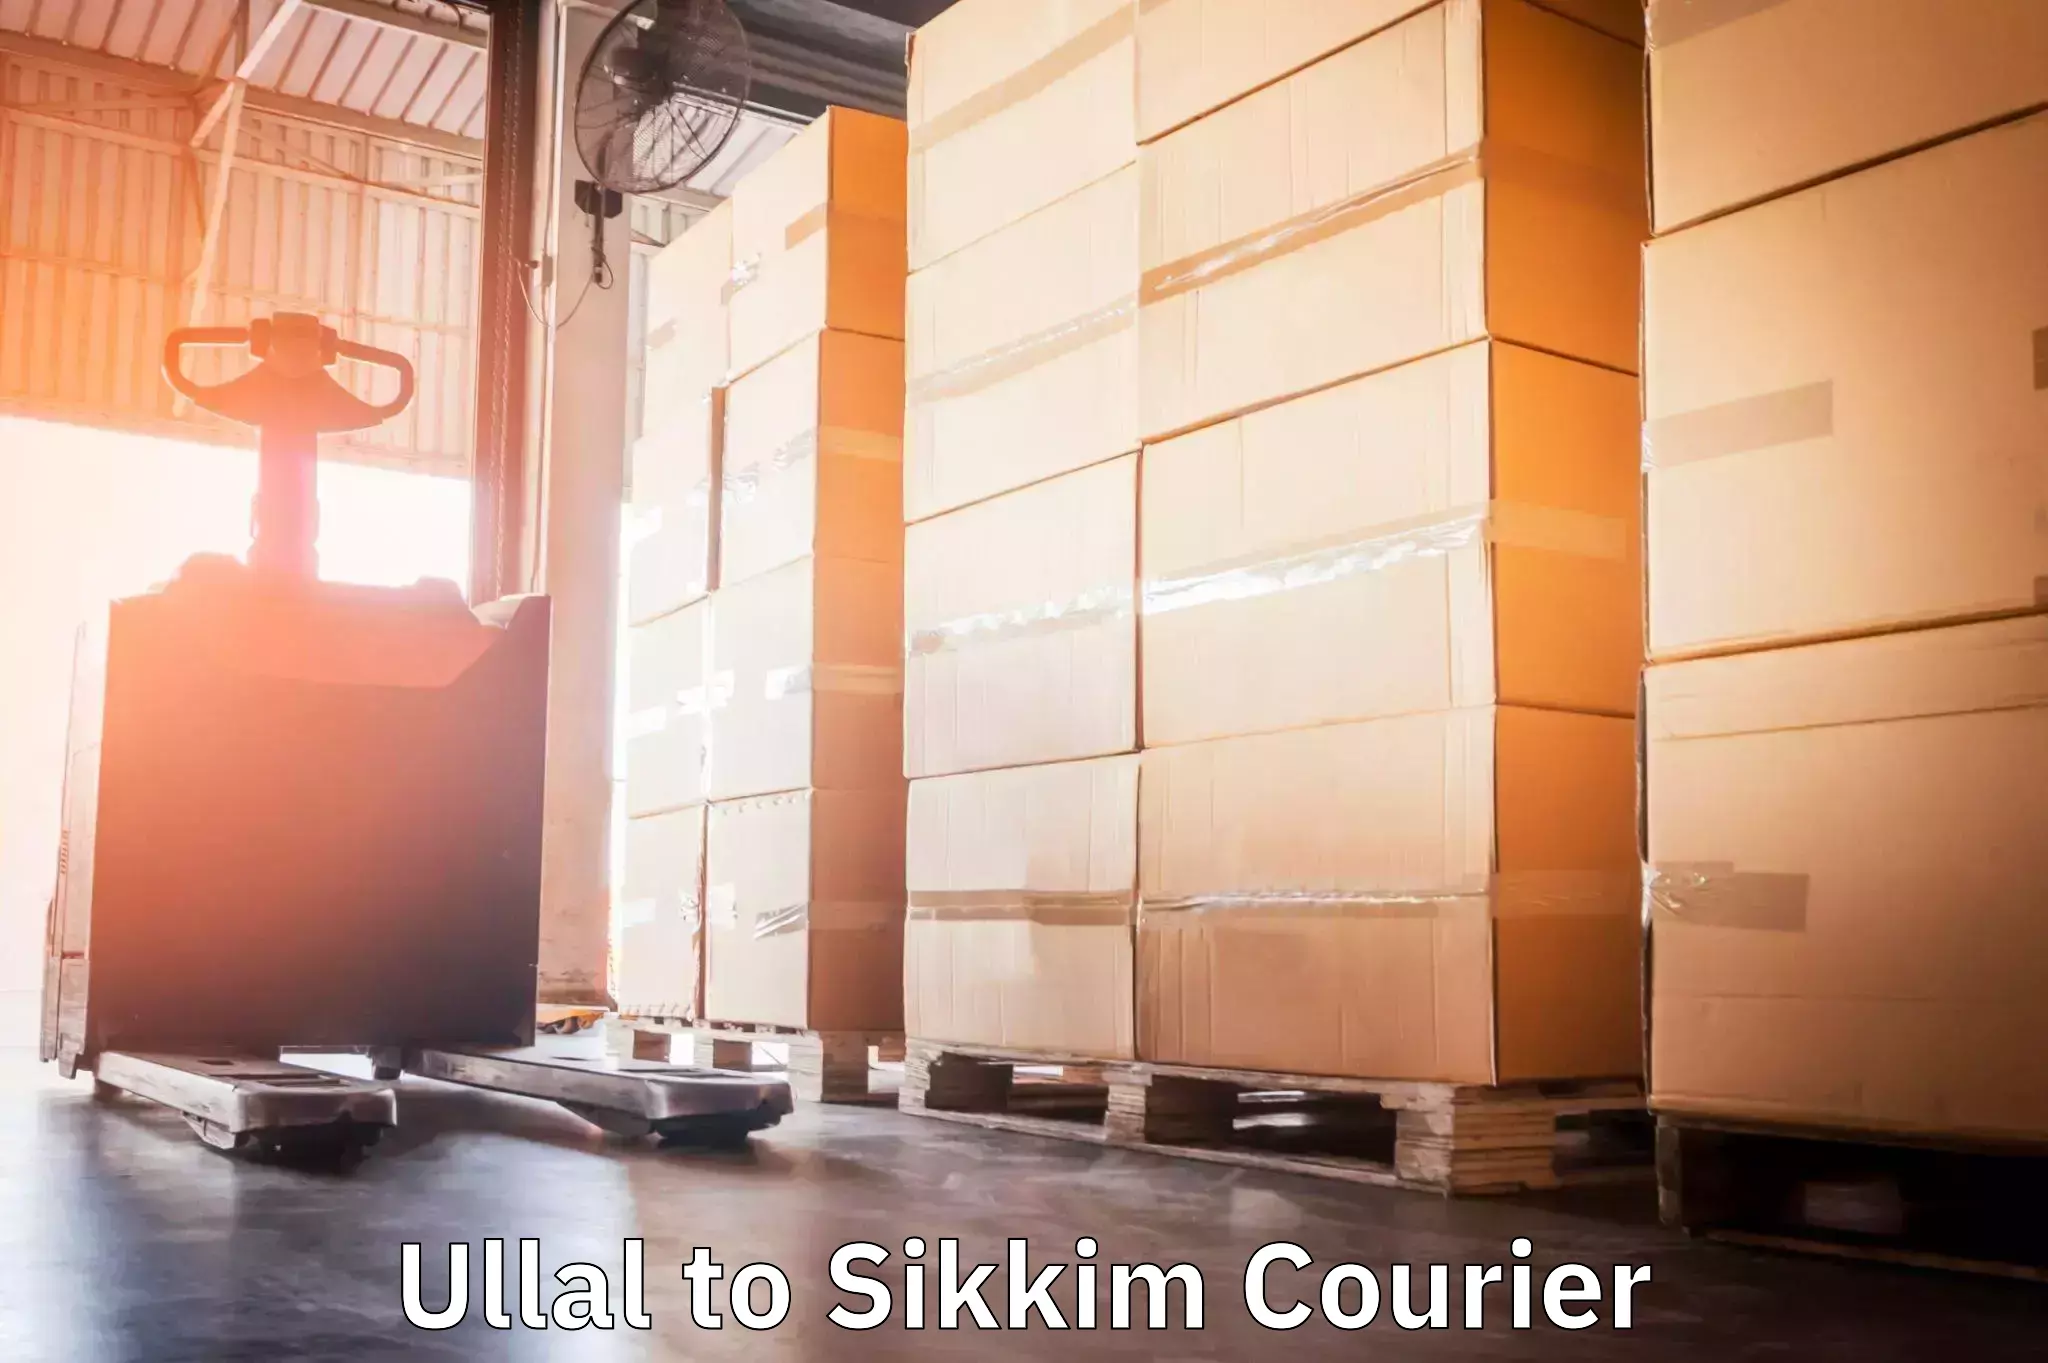 Global courier networks Ullal to Pelling